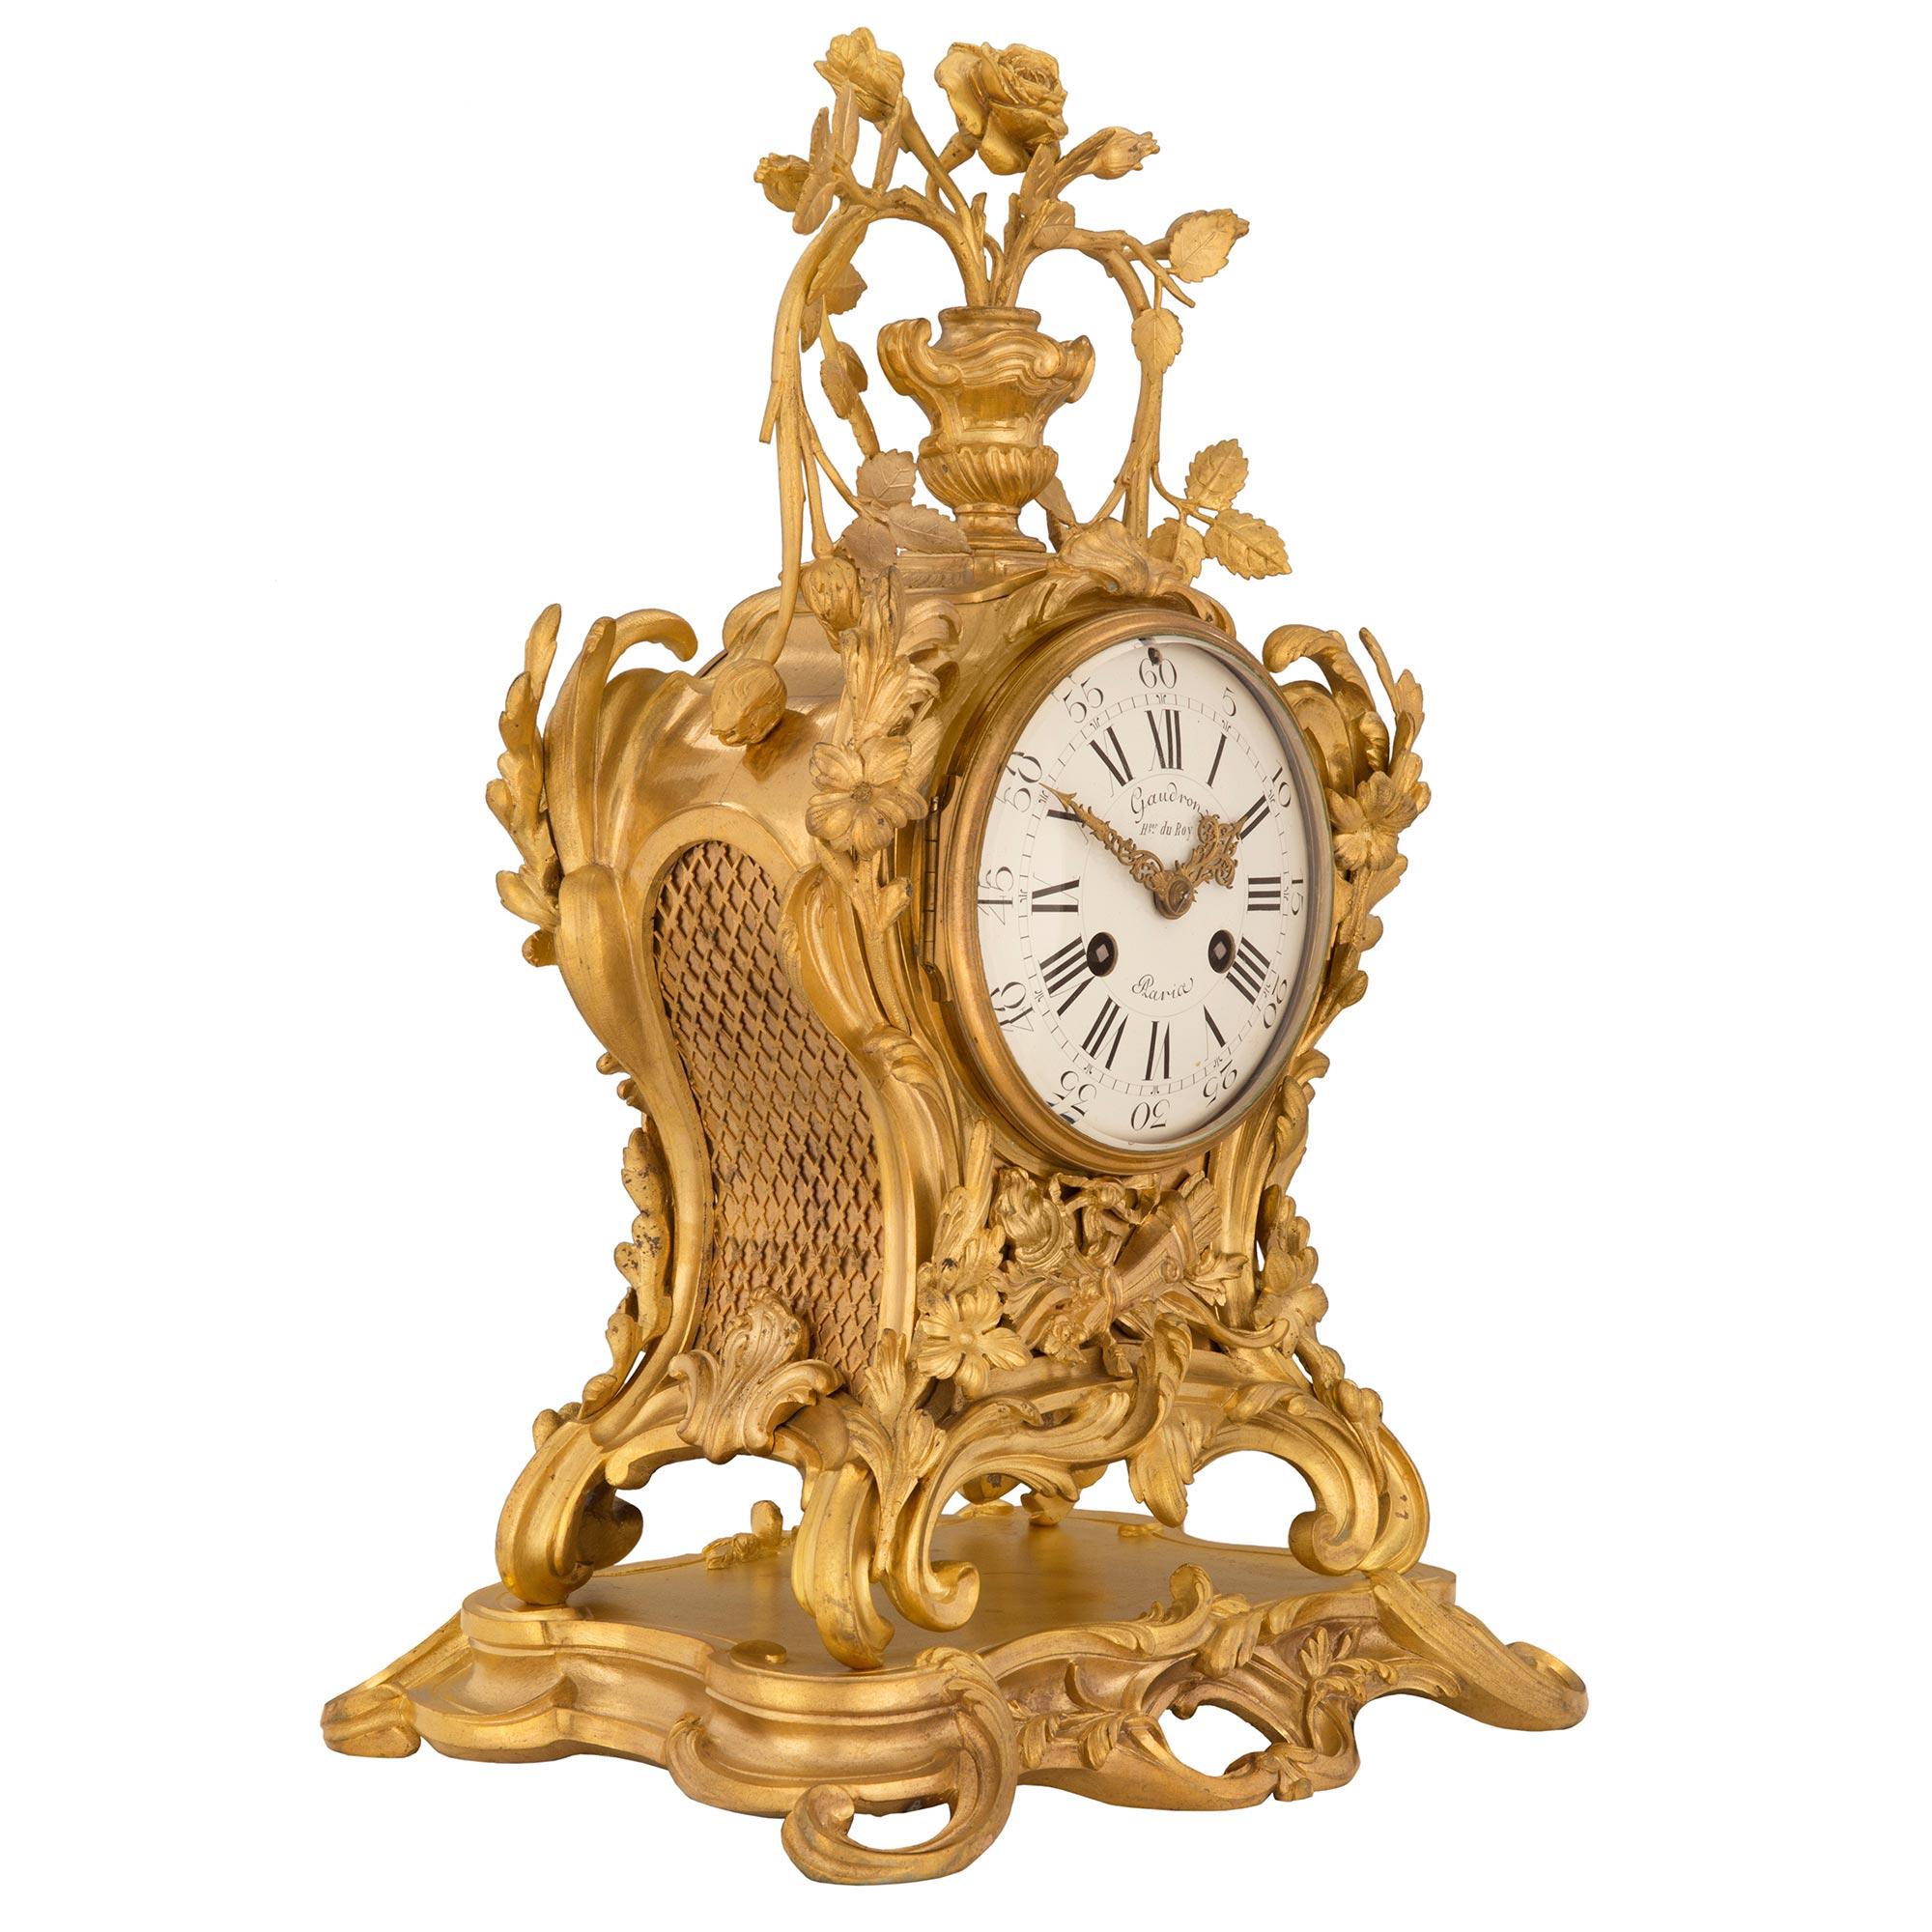 A superb French early 18th century Louis XV period ormolu clock, signed Gaudrons du Roy, Paris. The clock is raised on an ormolu base with luxuriant scrolled movements. Below the face and centering the clock is an intricately detailed reserve